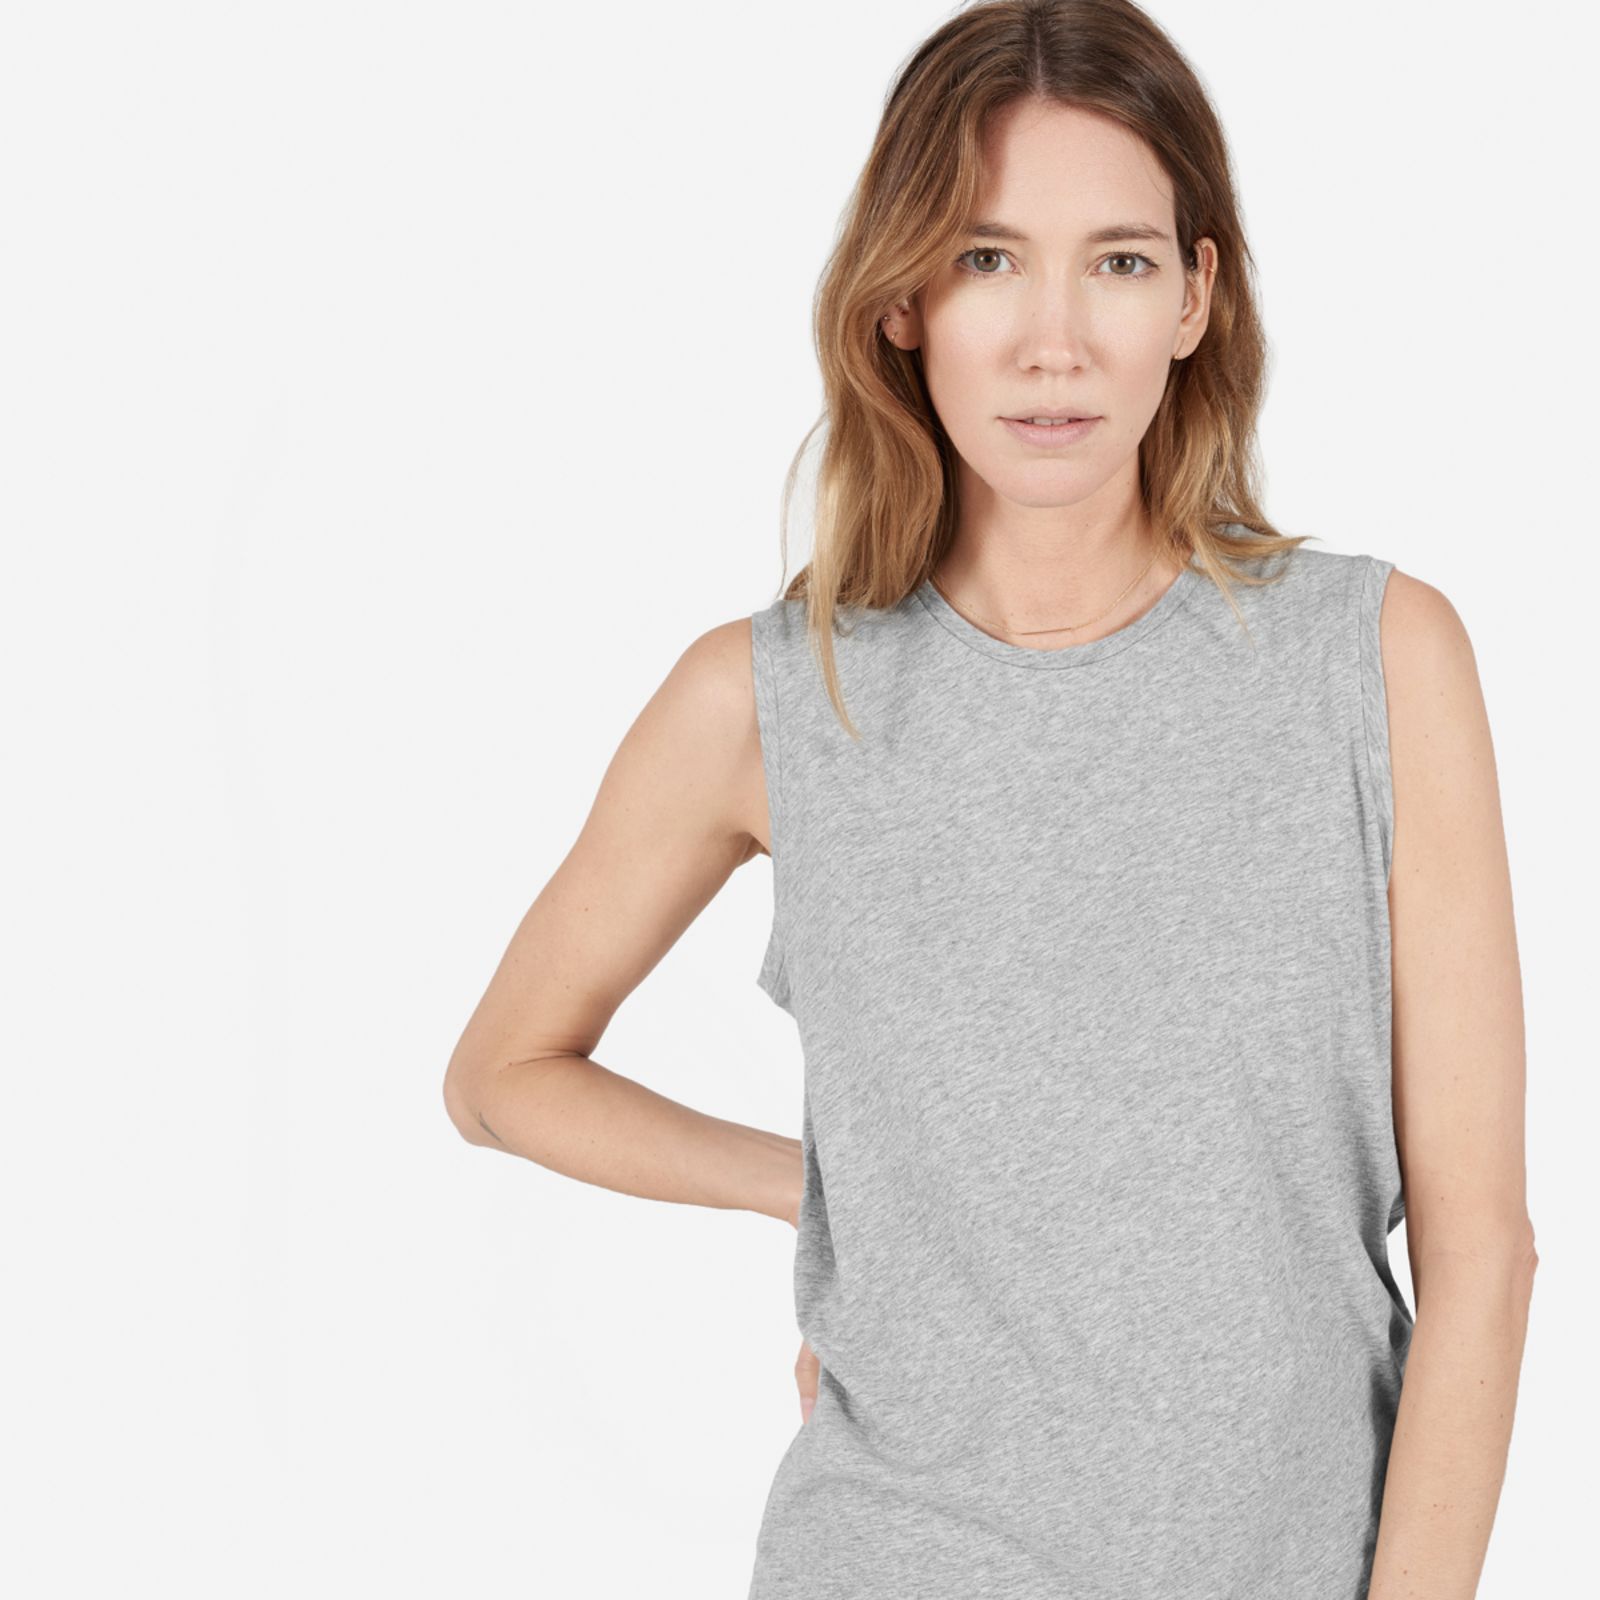 Women's Cotton Muscle Tank by Everlane in Heather Grey, Size XL | Everlane